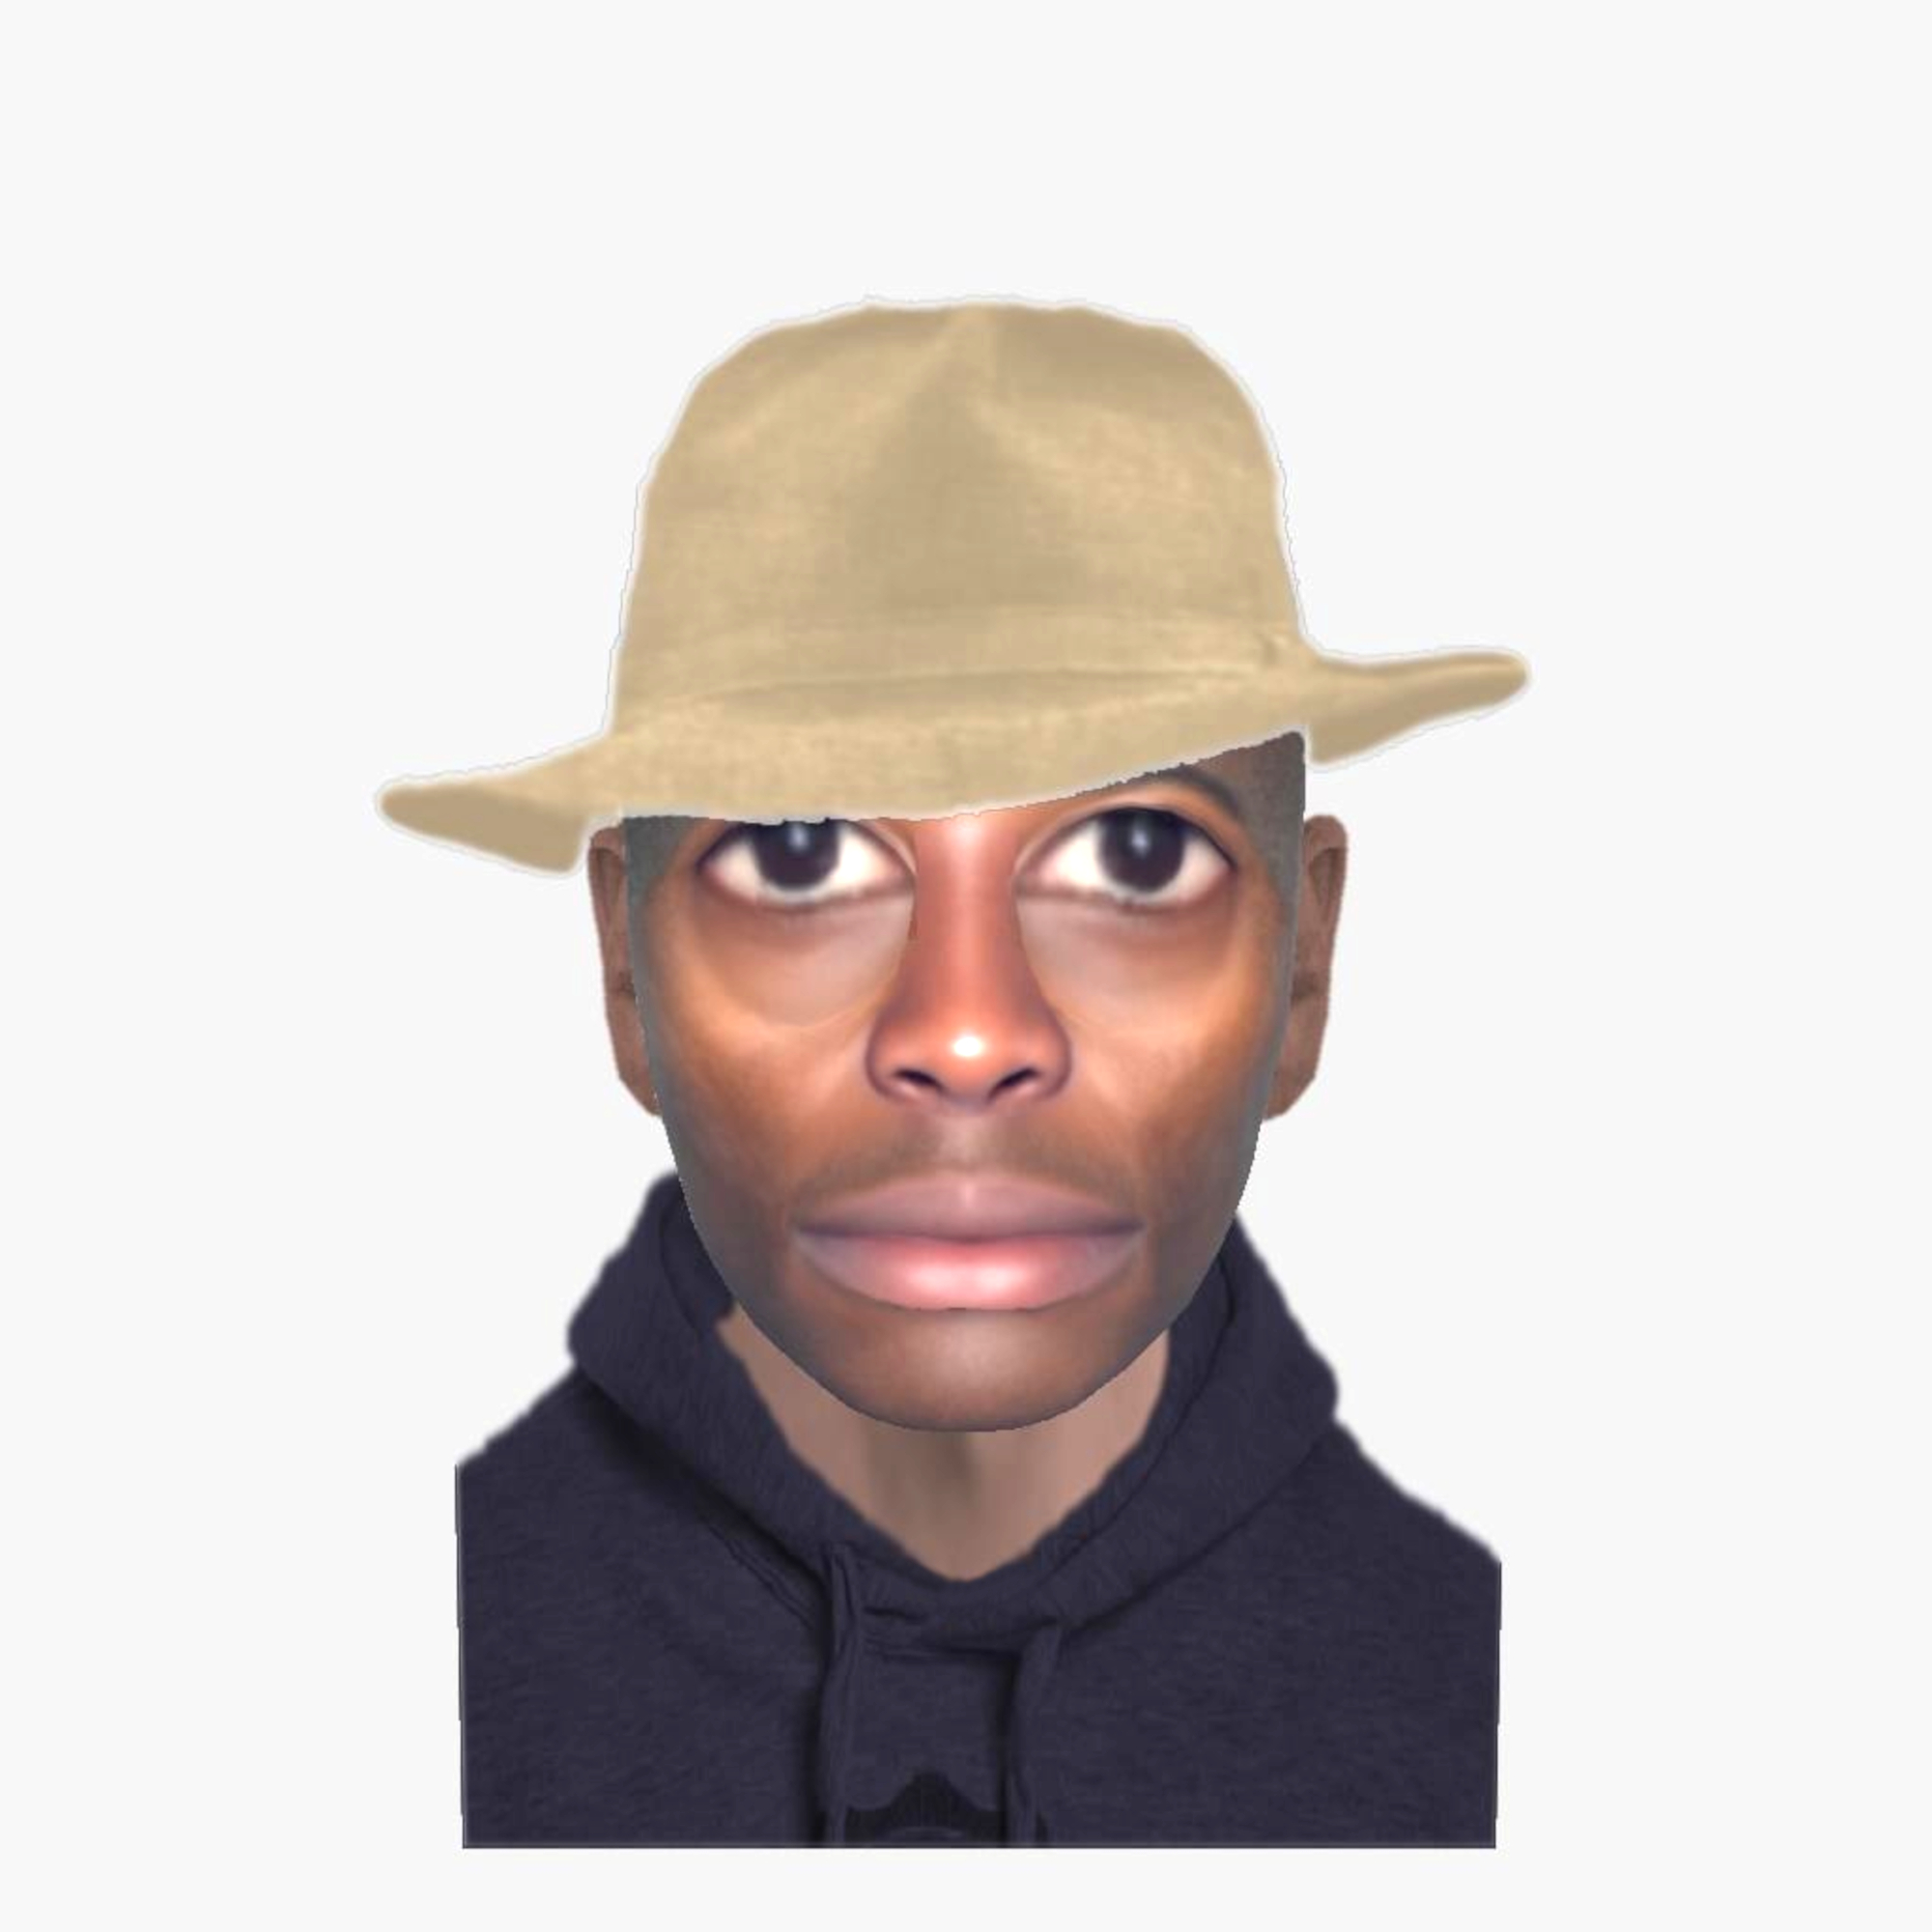 Read more about the article  Suspect Arrested For Sexual Assault After UK Cops Release Ridiculous Viral E-Fit To Find Him